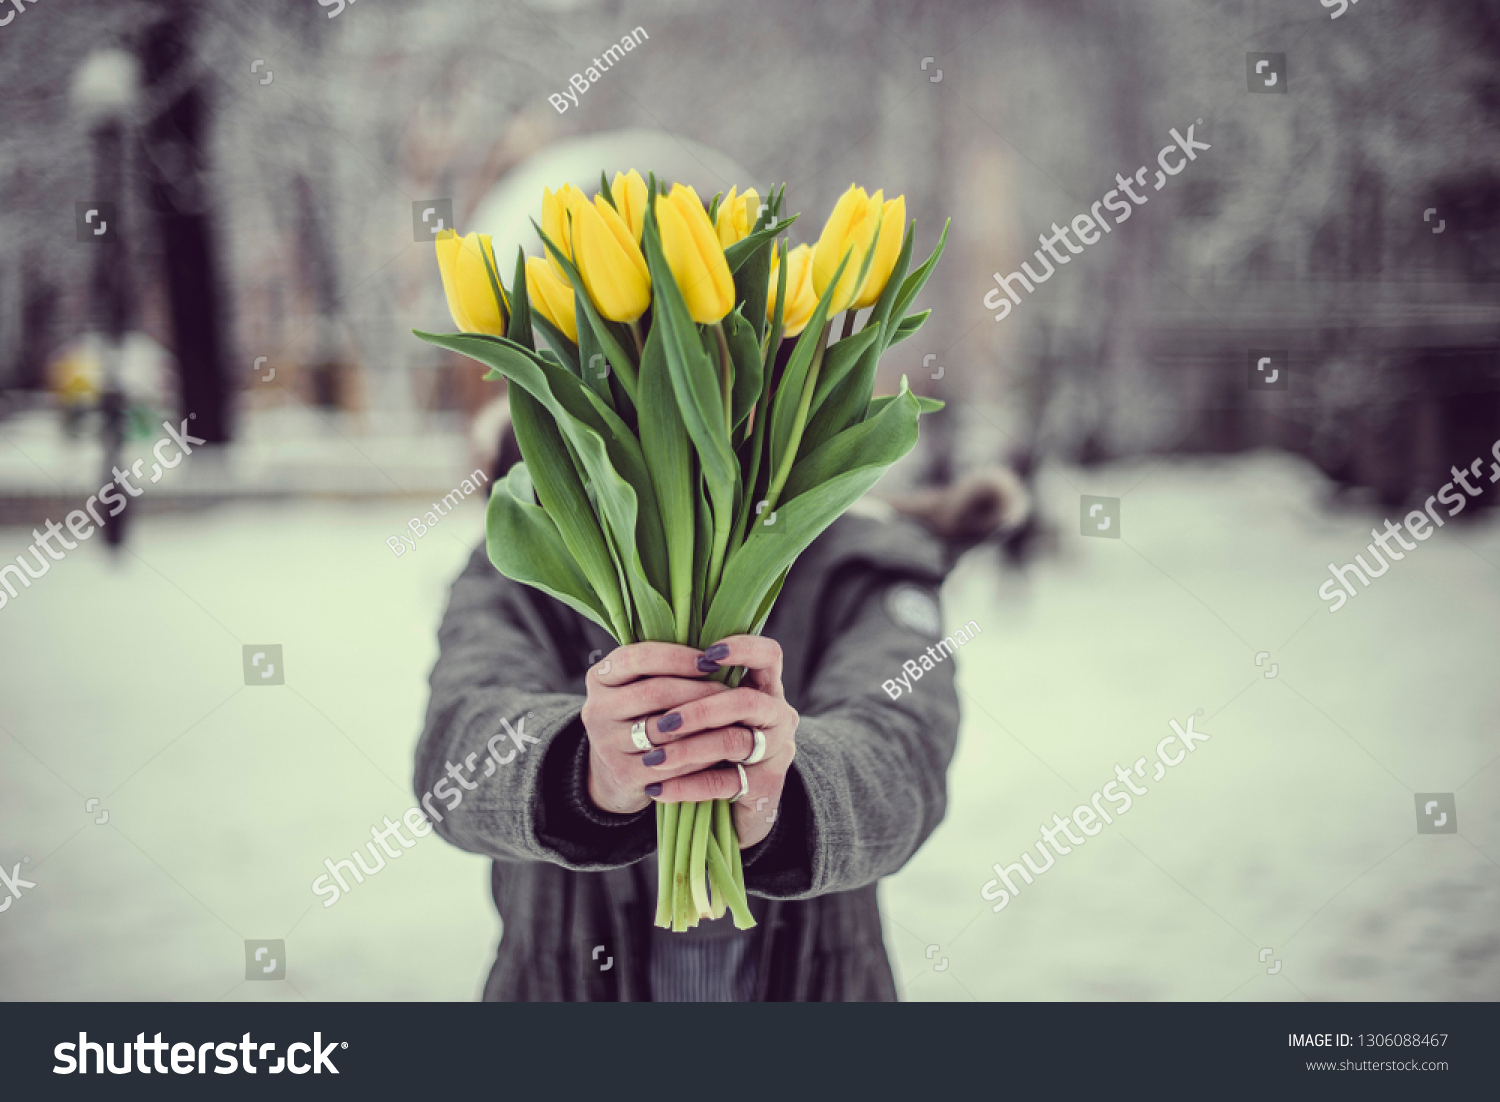 Yellow flowers tulips in the hands of a girl. Snow, winter landscape. Background to Valentine's Day and March 8th.  #1306088467